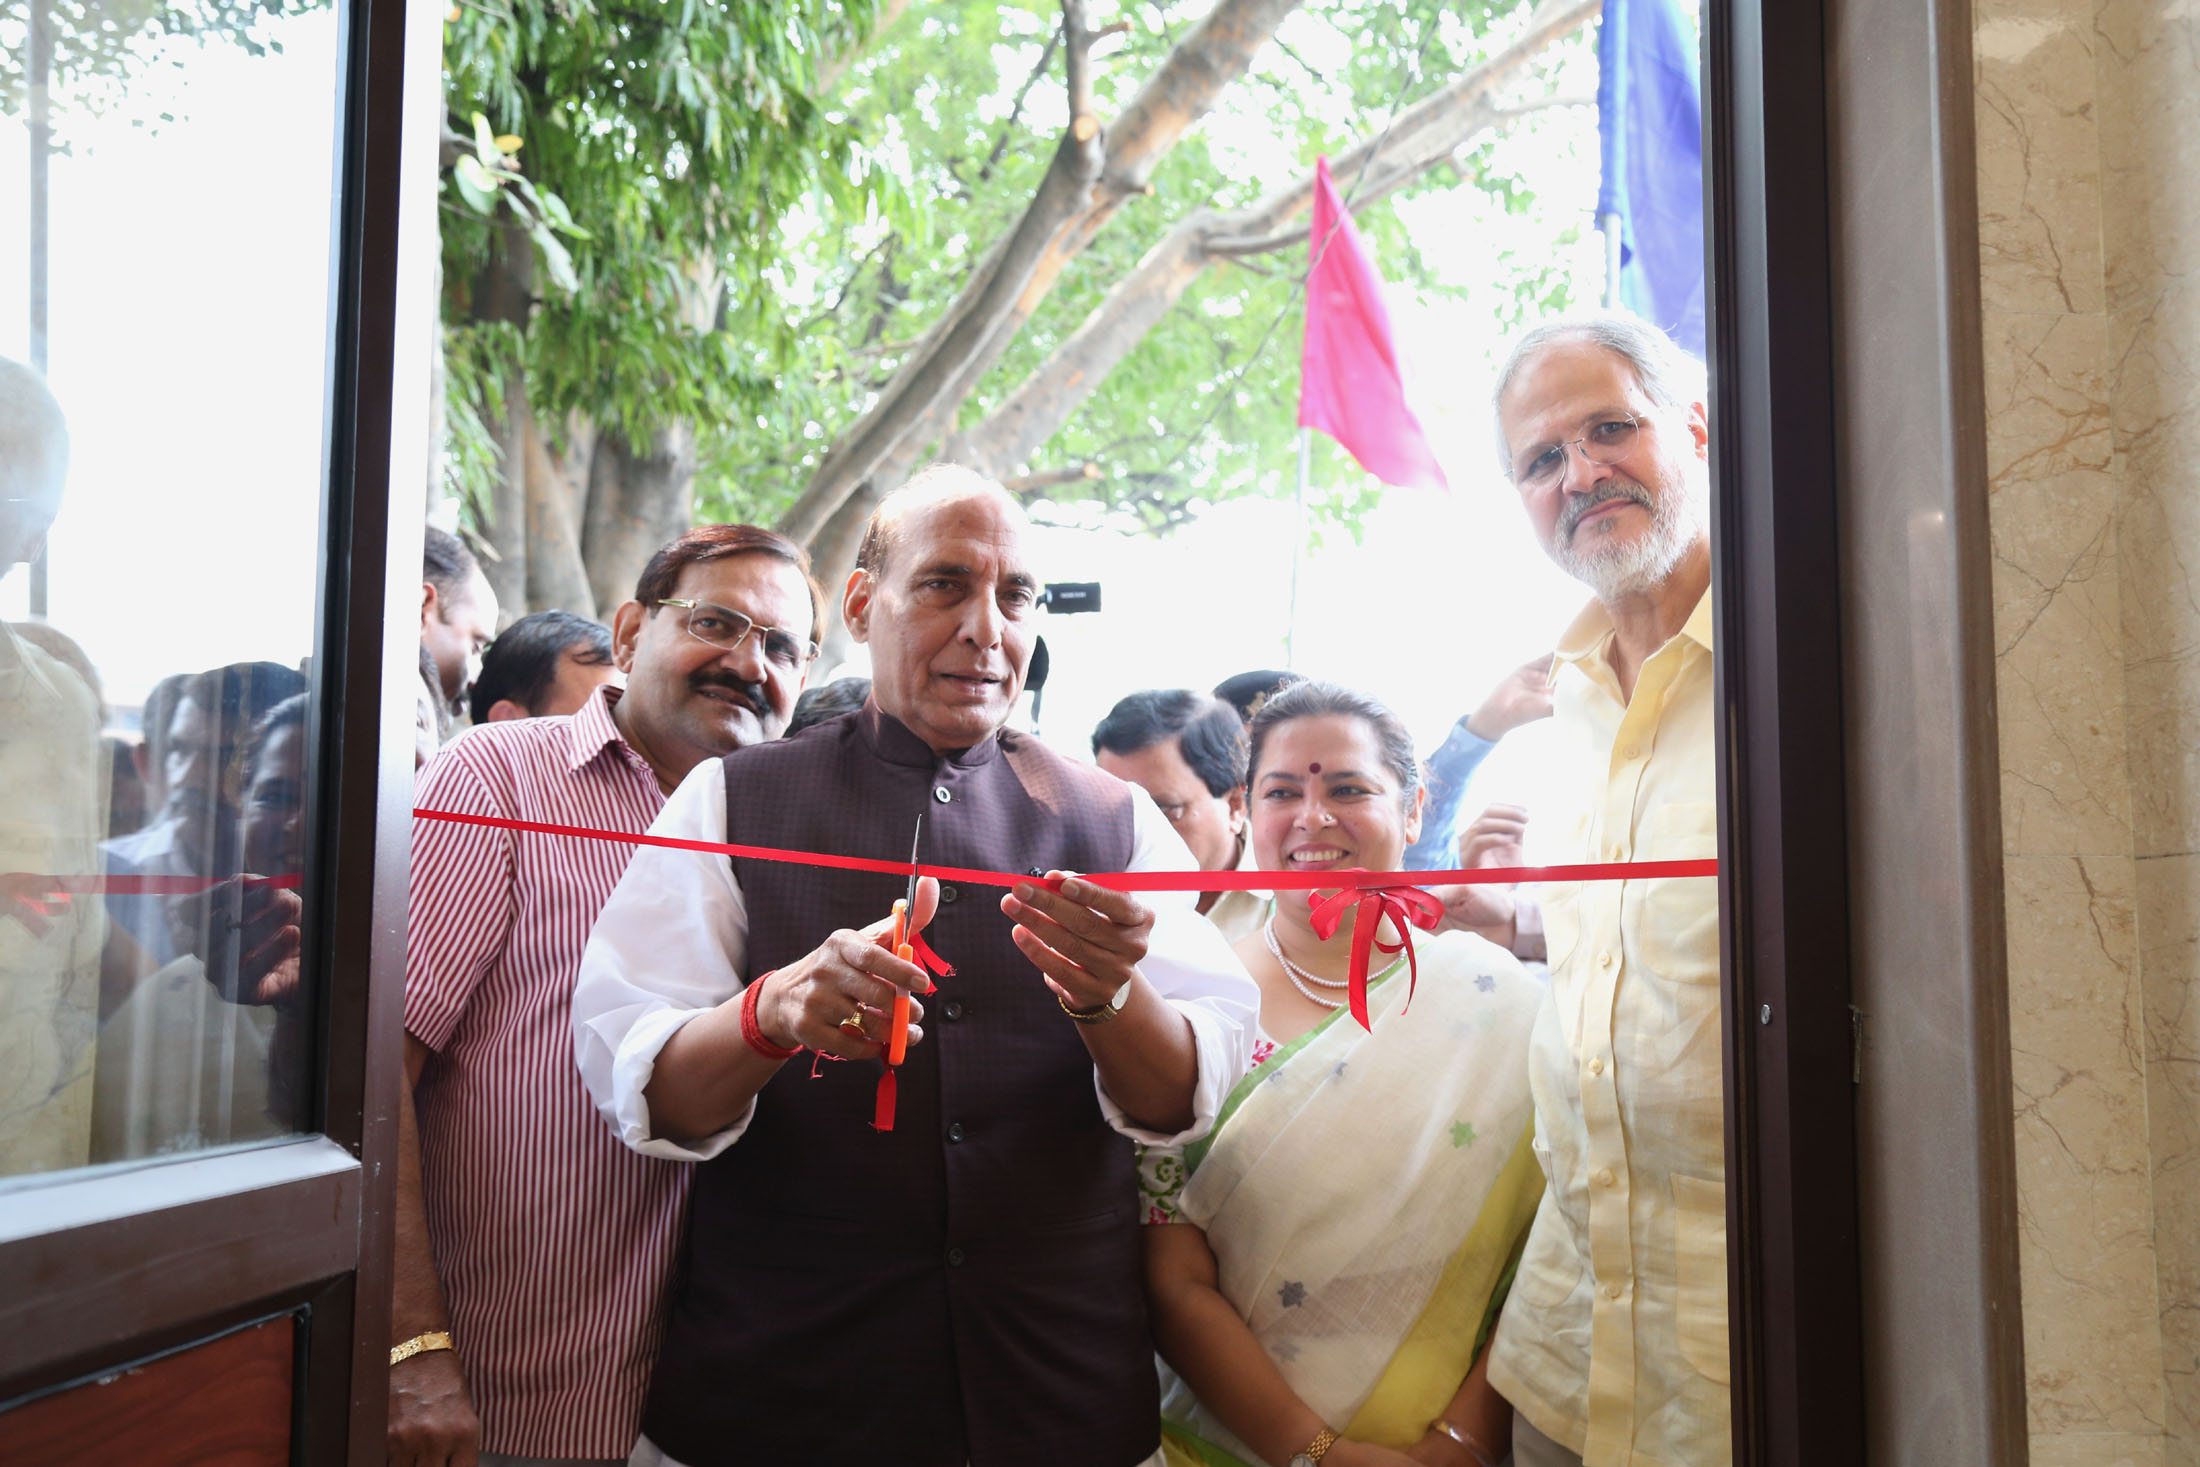 The Union Home Minister, Shri Rajnath Singh inaugurating the NDMC's Smart Public Toilet Utility at Rafi Marg-Chelmsford Club, in New Delhi on October 02, 2016. The Lt. Governor of Delhi, Shri Najeeb Jung is also seen.